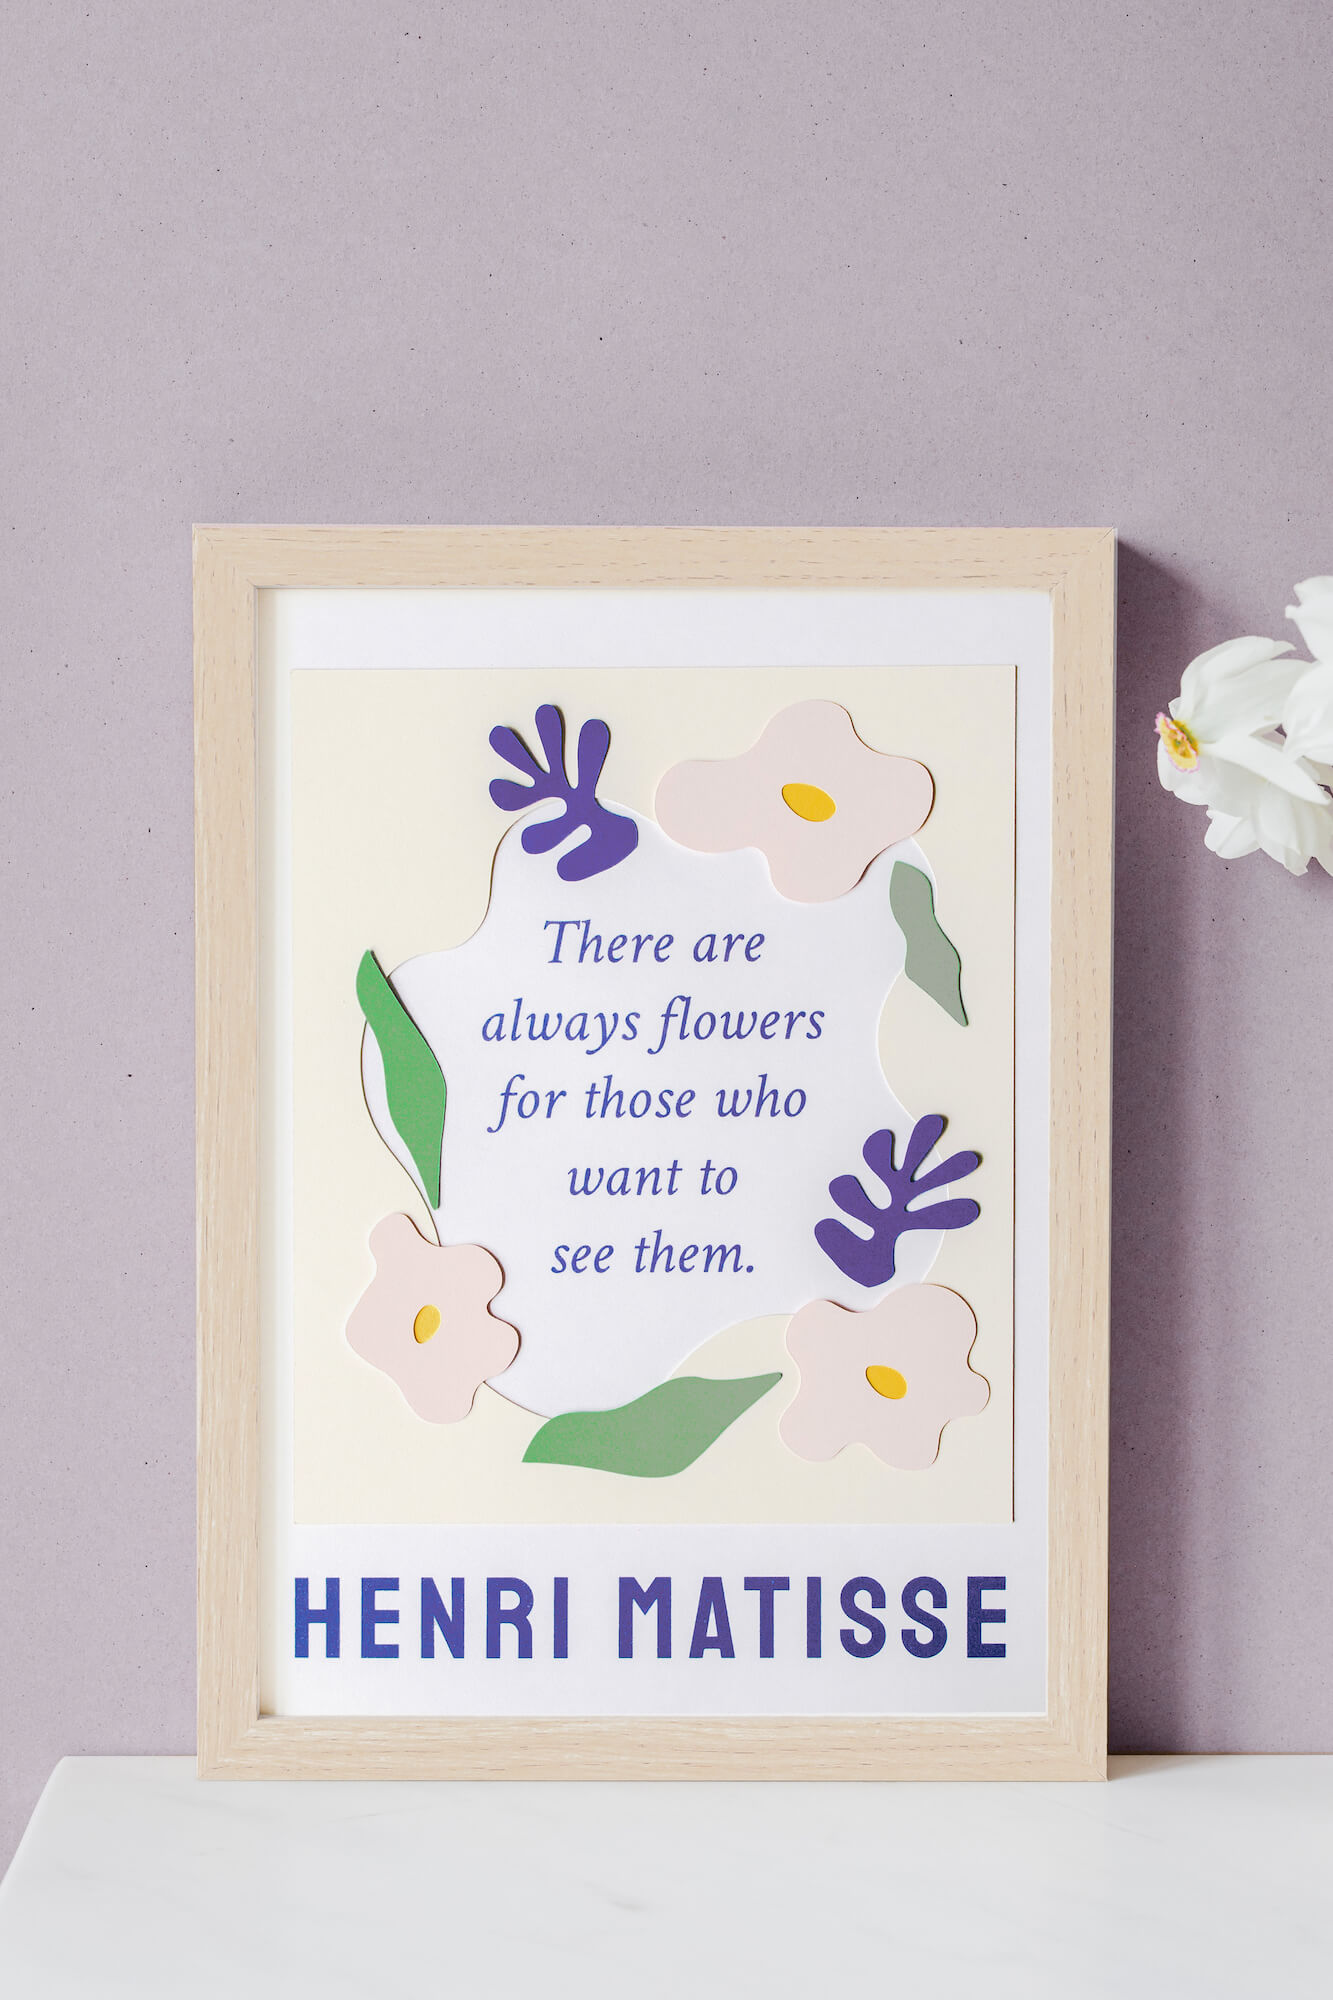 Henri Matisse quote designed with free Springtime fonts from Google fonts.